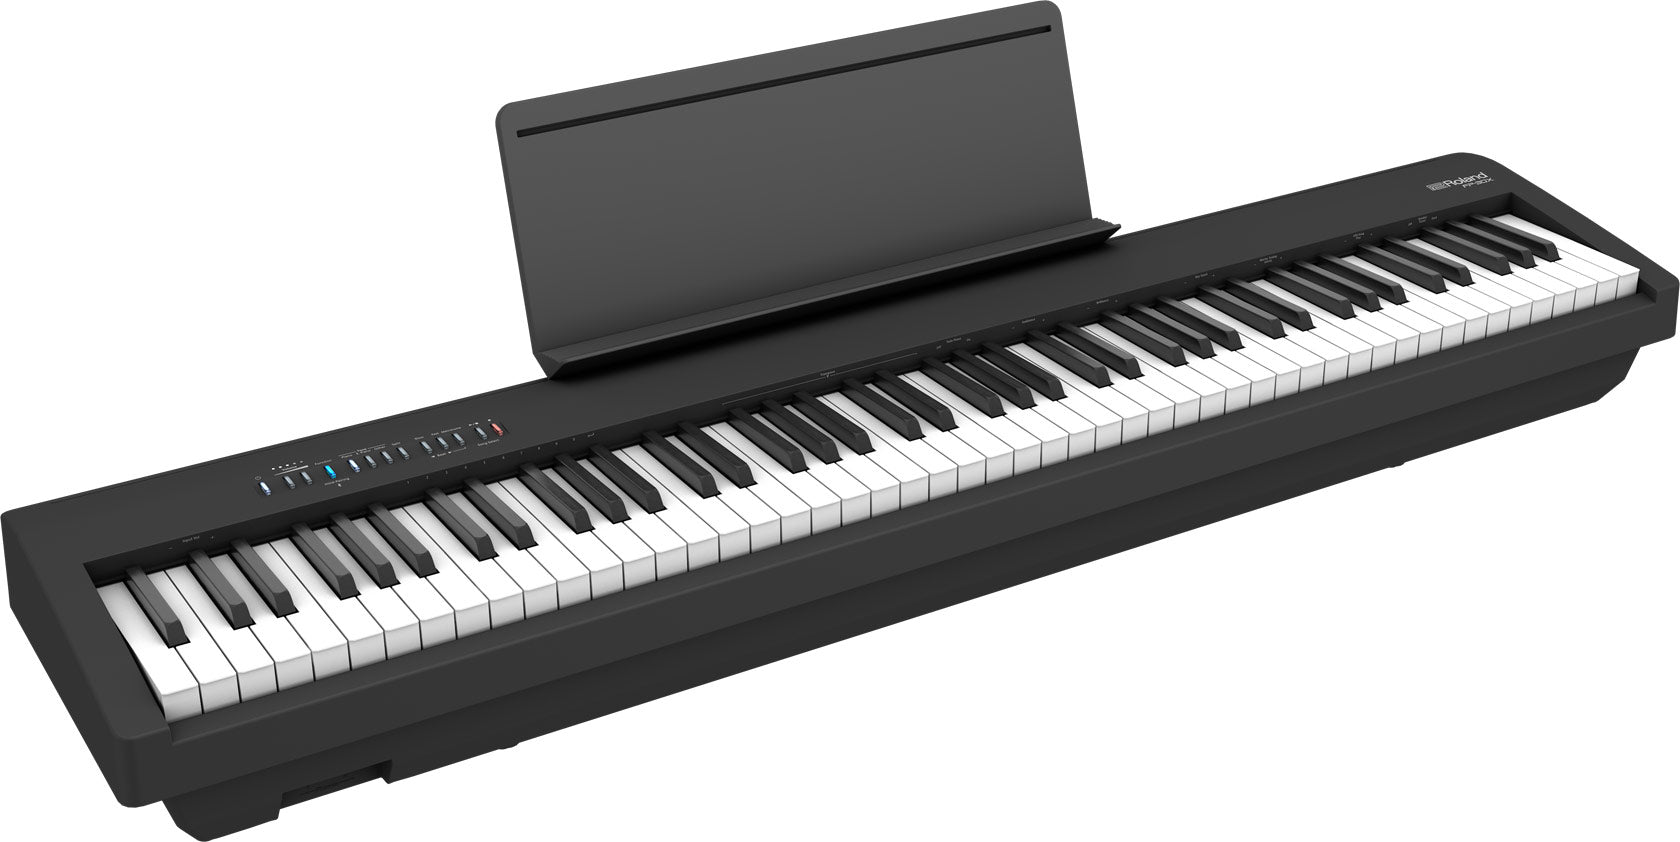 Roland FP-30X Digital Piano 88 keys With Wood stand & Tri Pedal Free with Roland RH-5 Headphone and Piano Bench - Black (FP30X / FP 30X), ROLAND, DIGITAL PIANO, roland-digital-piano-fp30x-bk, ZOSO MUSIC SDN BHD